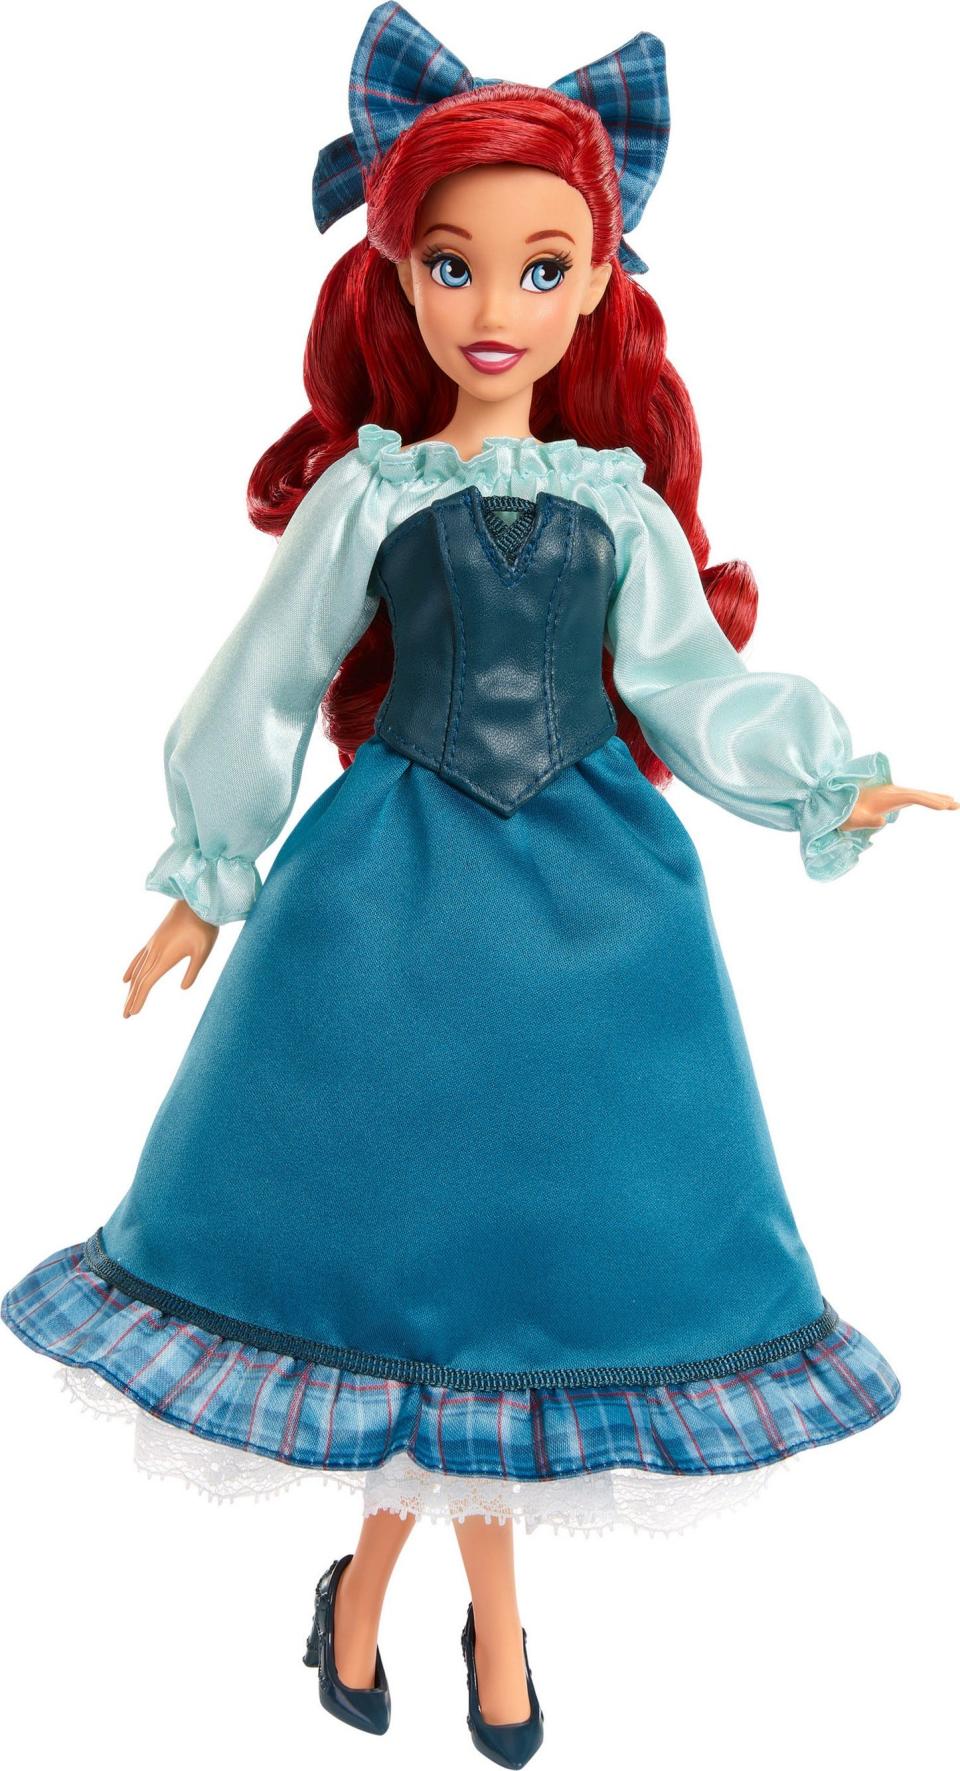 The Disney100 Retro Reimagined Disney Princess Ariel fashion doll is among the offerings on Target's Bullseye’s Top Toys holiday toy list.